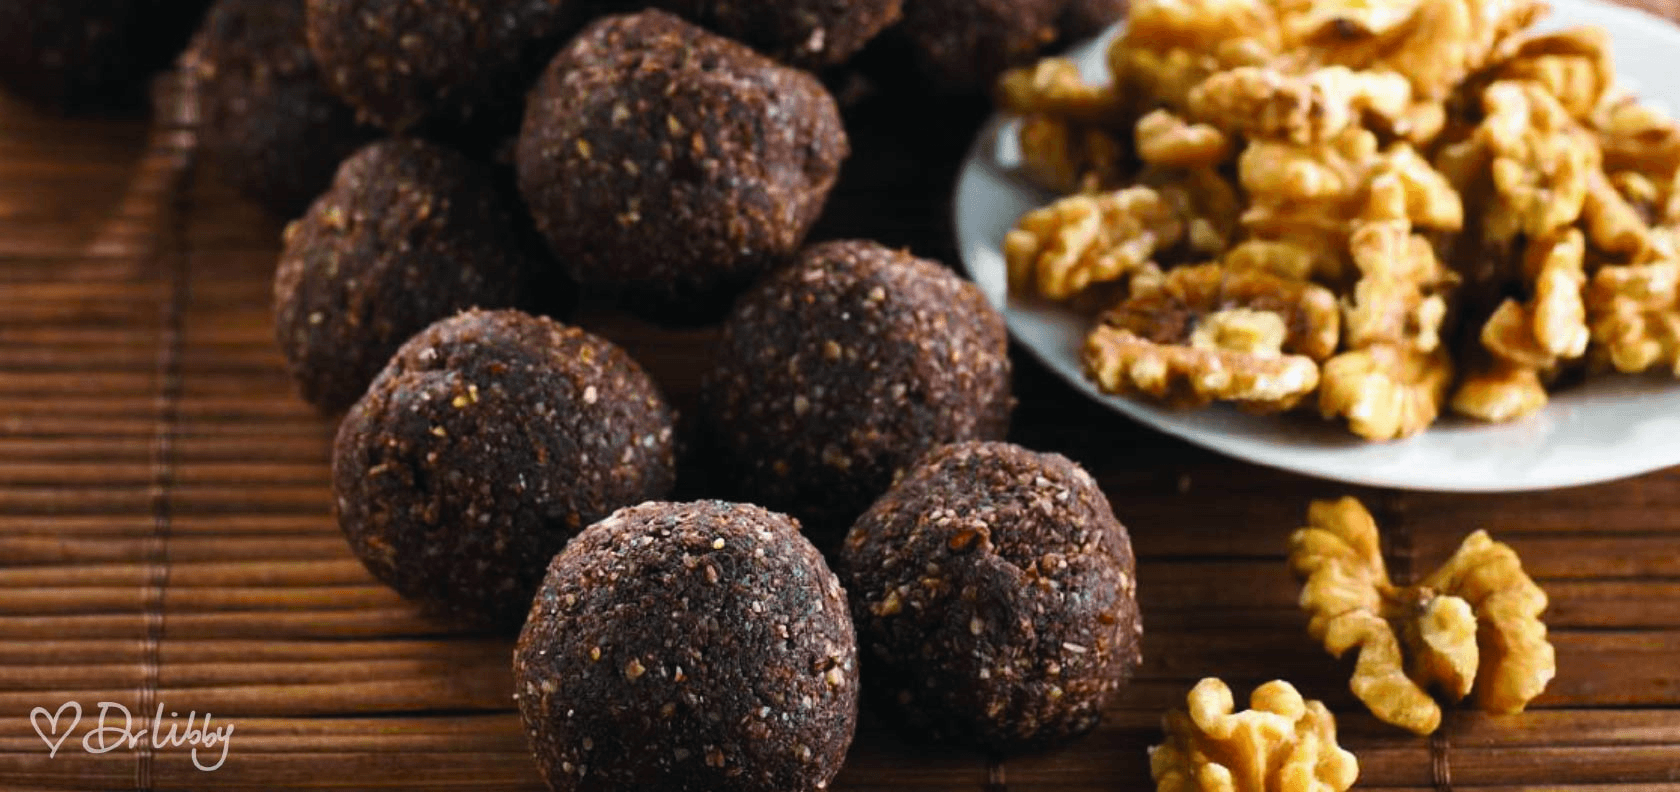 The BEST Bliss Balls recipe - Brain Balls by Dr Libby